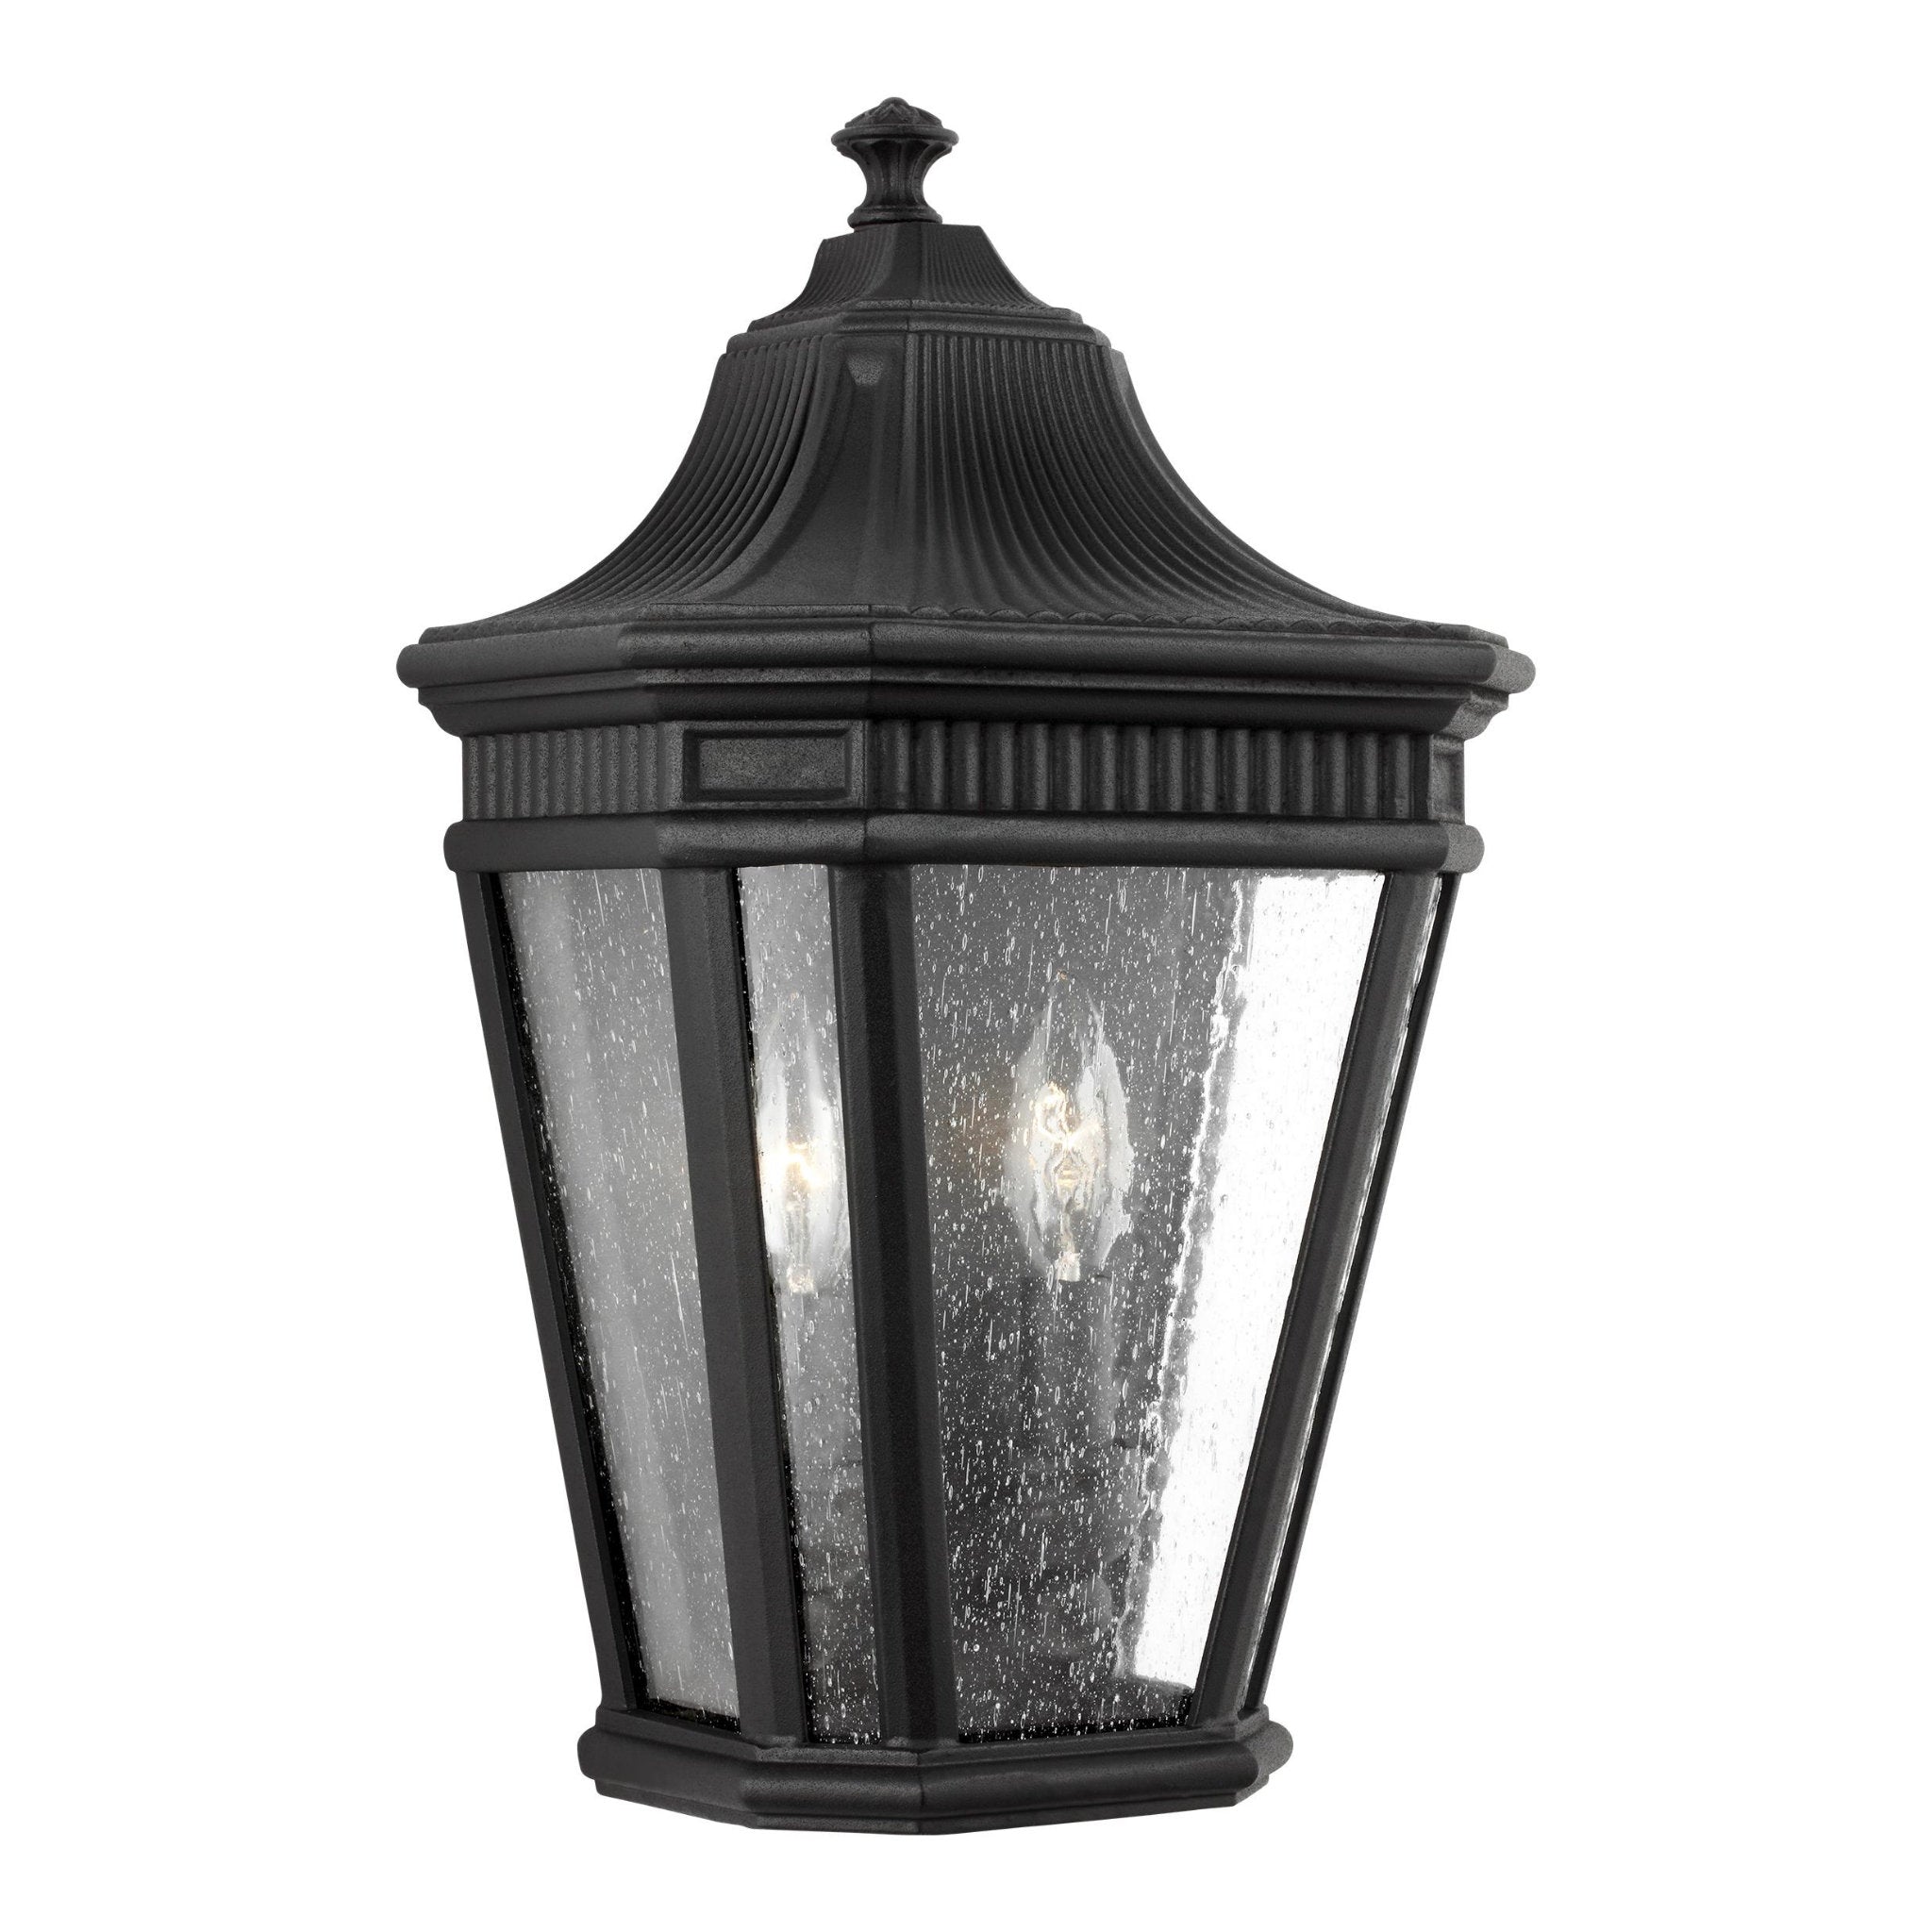 Cotswold Lane Pocket Lantern Traditional Outdoor Fixture 9.5" Width 16" Height Aluminum Irregular Clear Seeded Shade in Black